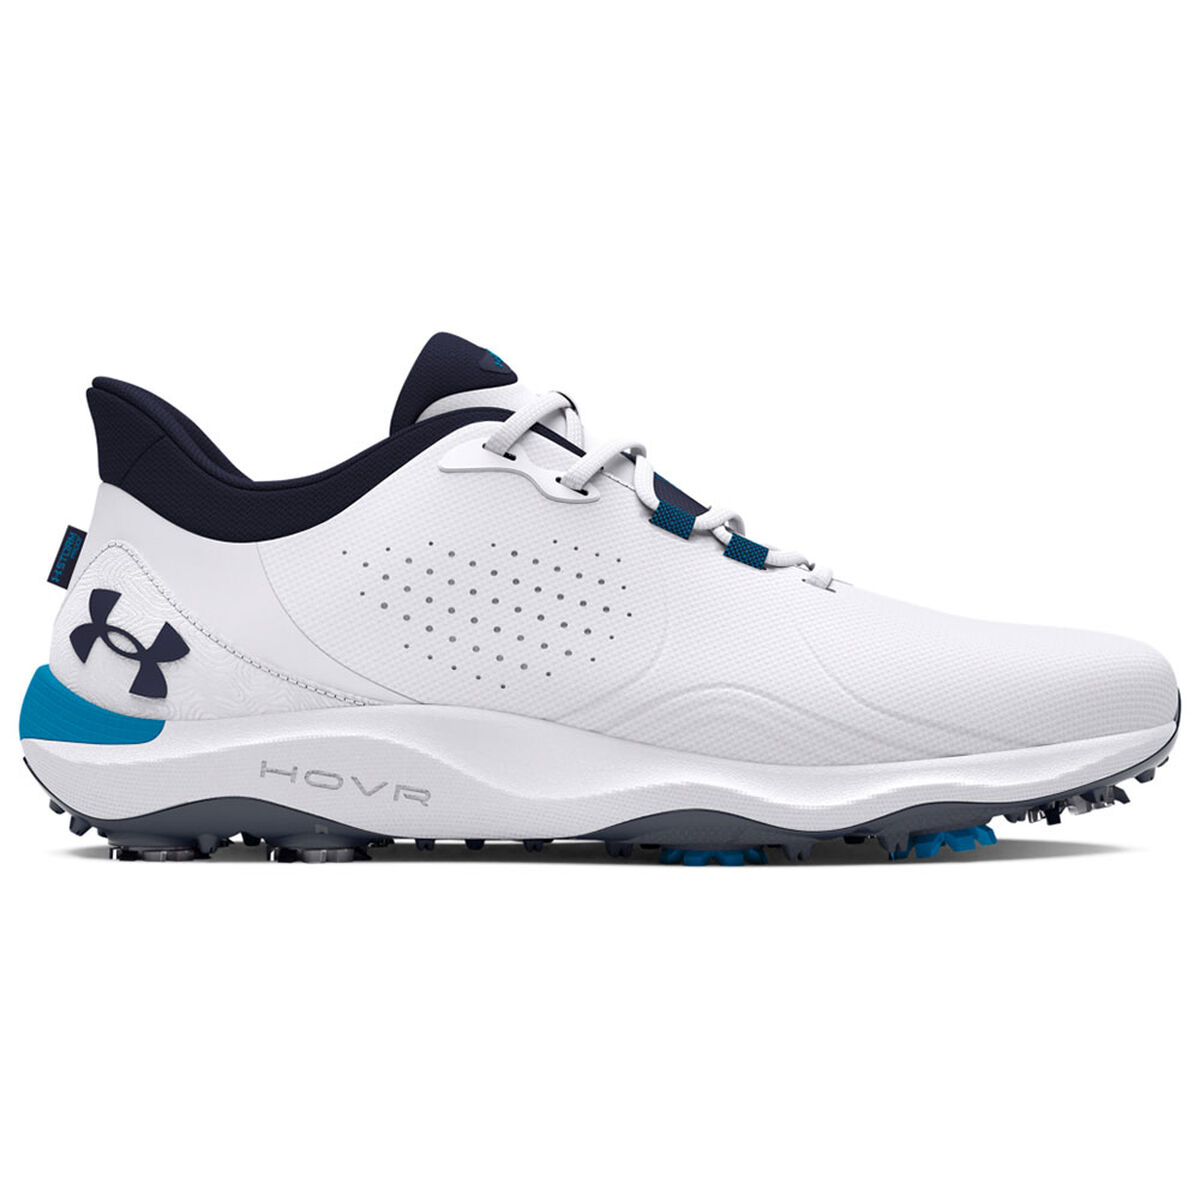 Under Armour Men’s Drive Pro Waterproof Spiked Golf Shoes, Mens, White/capri/midnight navy, 12 | American Golf